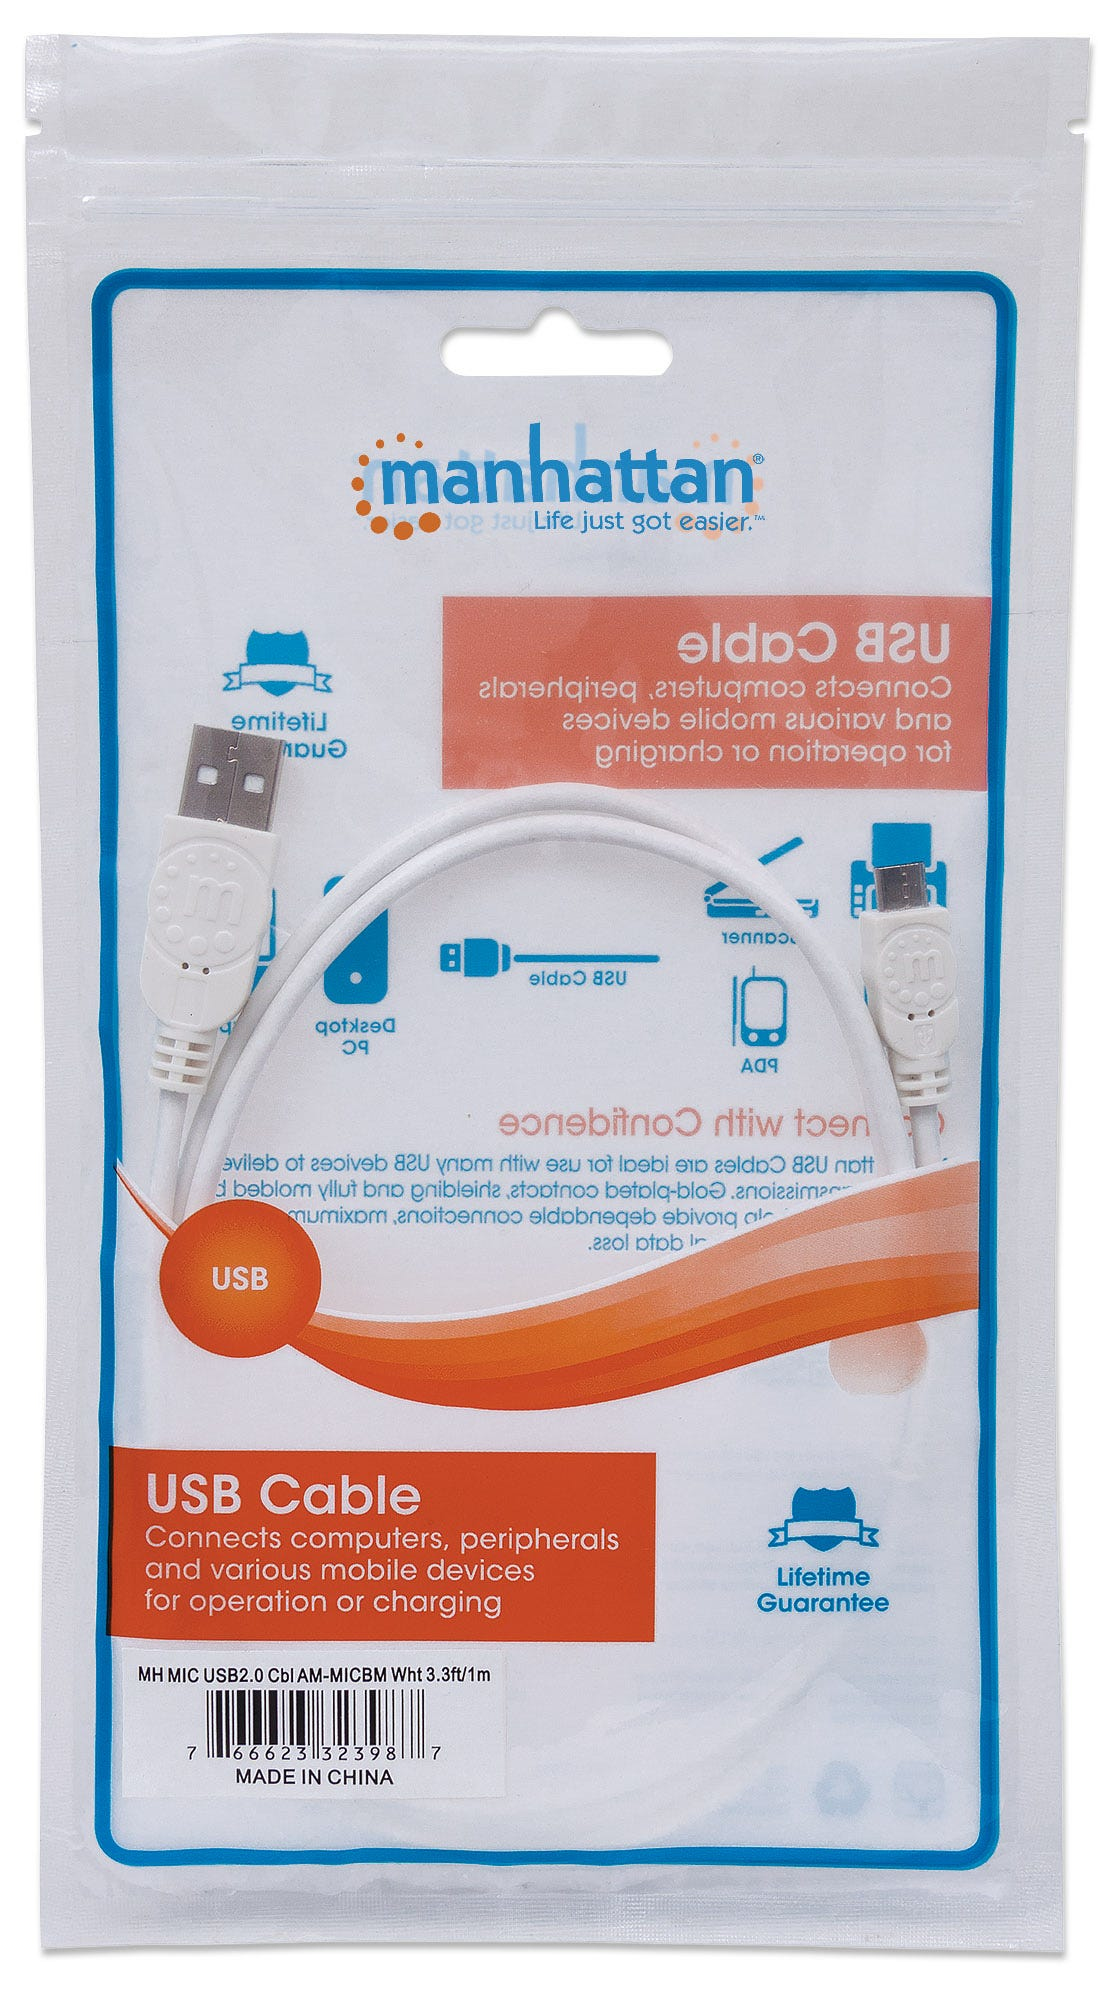 Manhattan USB-A to Micro-USB Cable, 1m, Male to Male, 480 Mbps (USB 2.0), White, Polybag